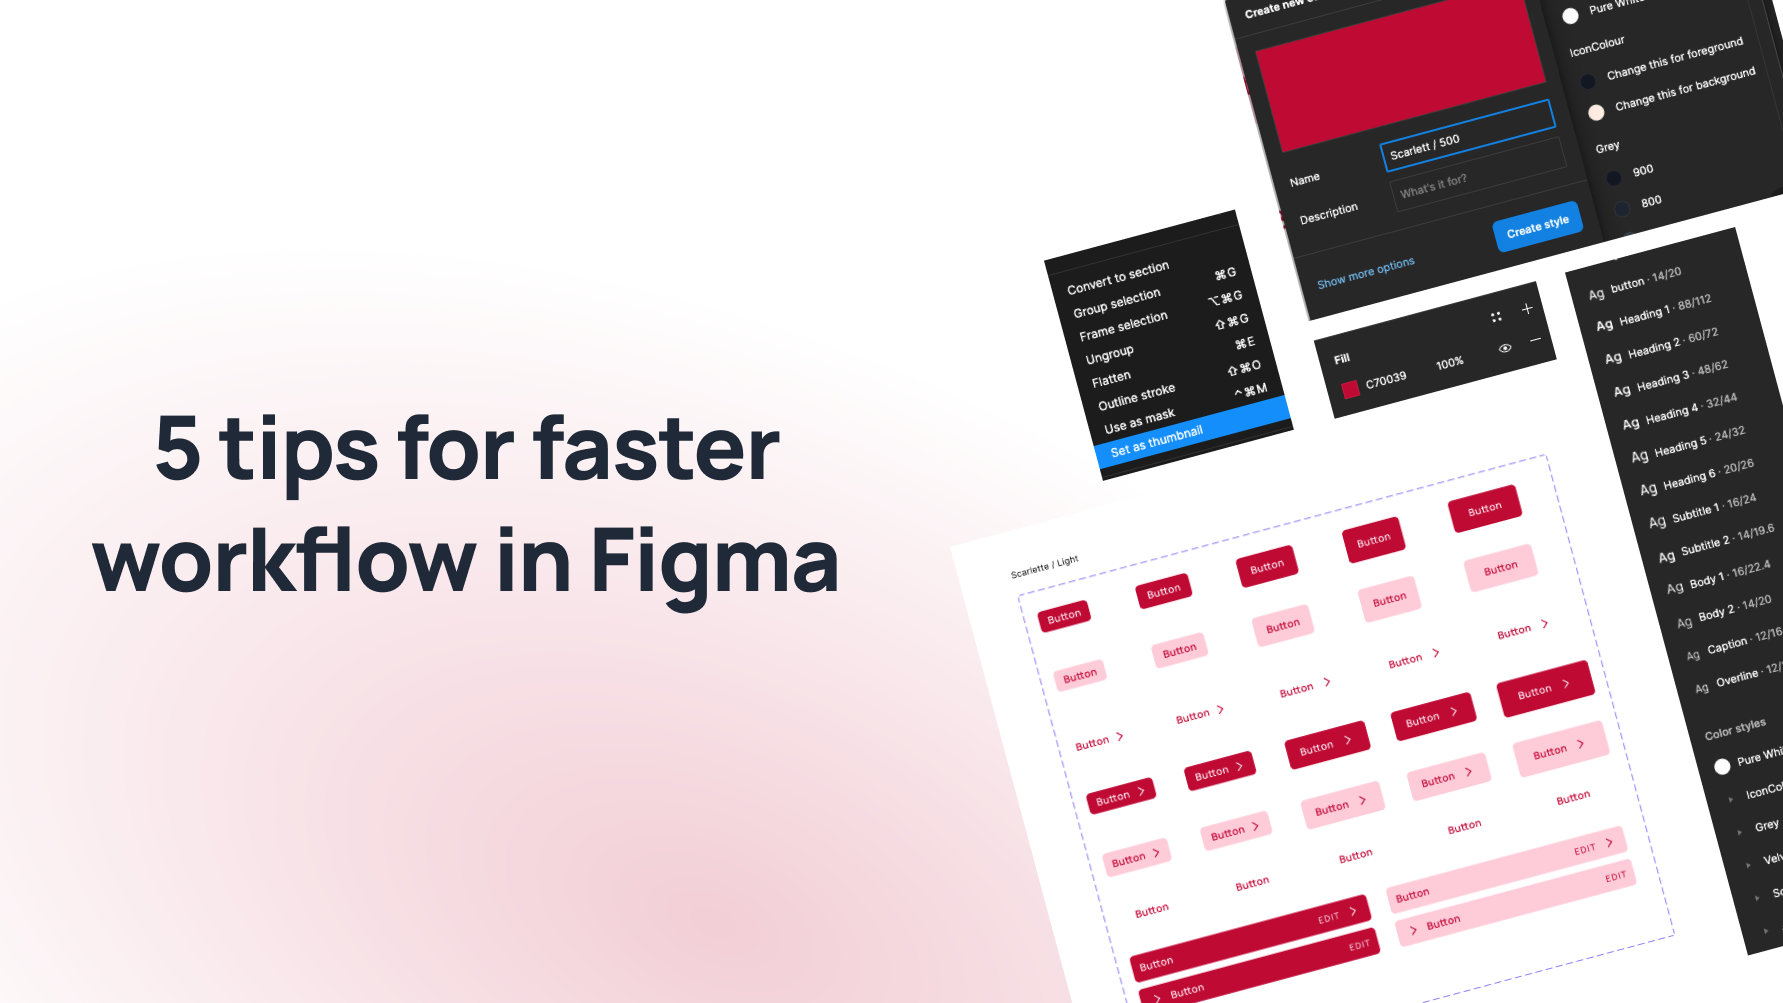 5 tips for faster workflow in Figma